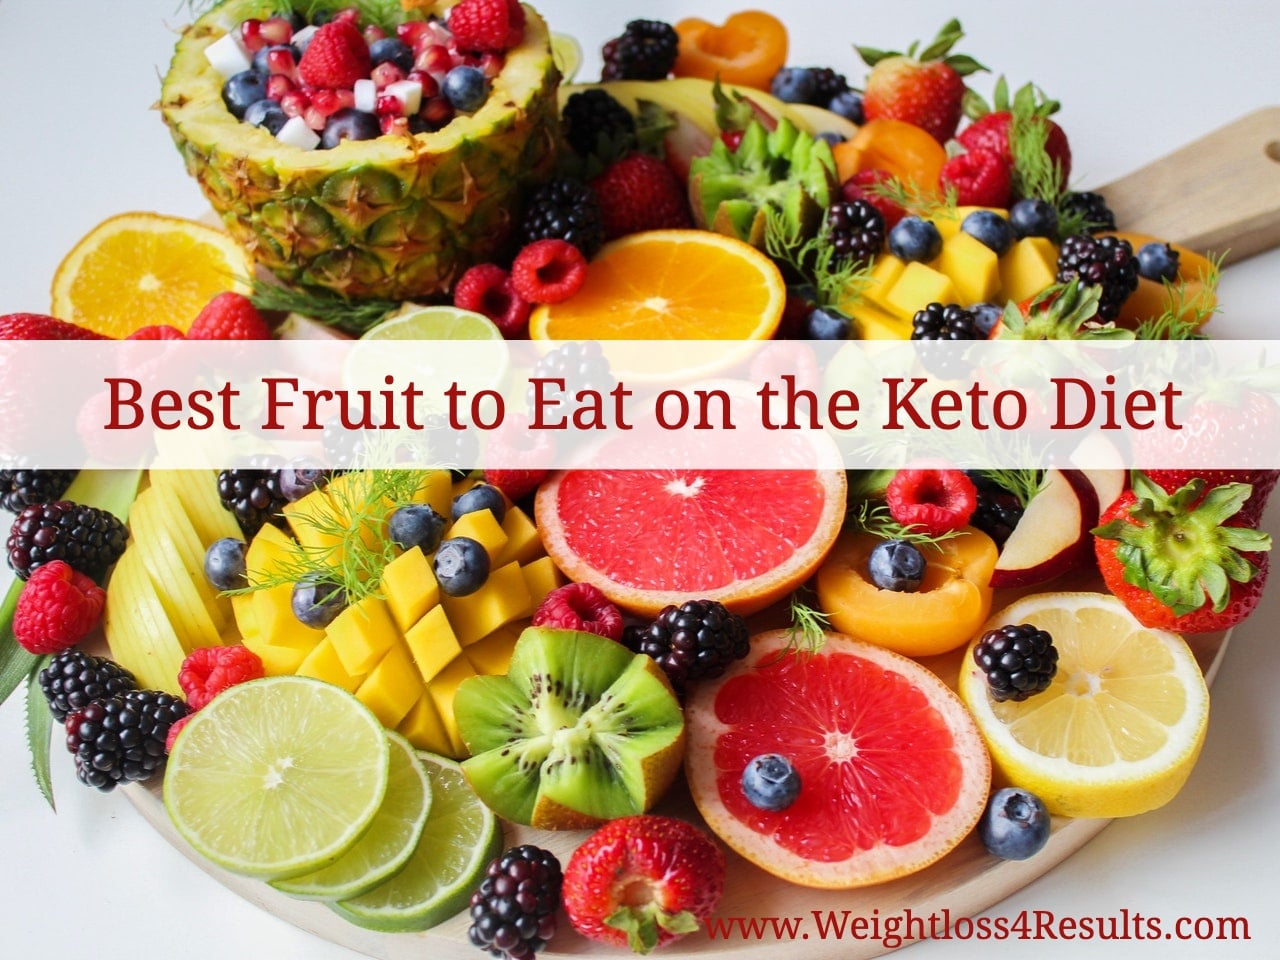 Best Fruit to Eat on the Keto Diet